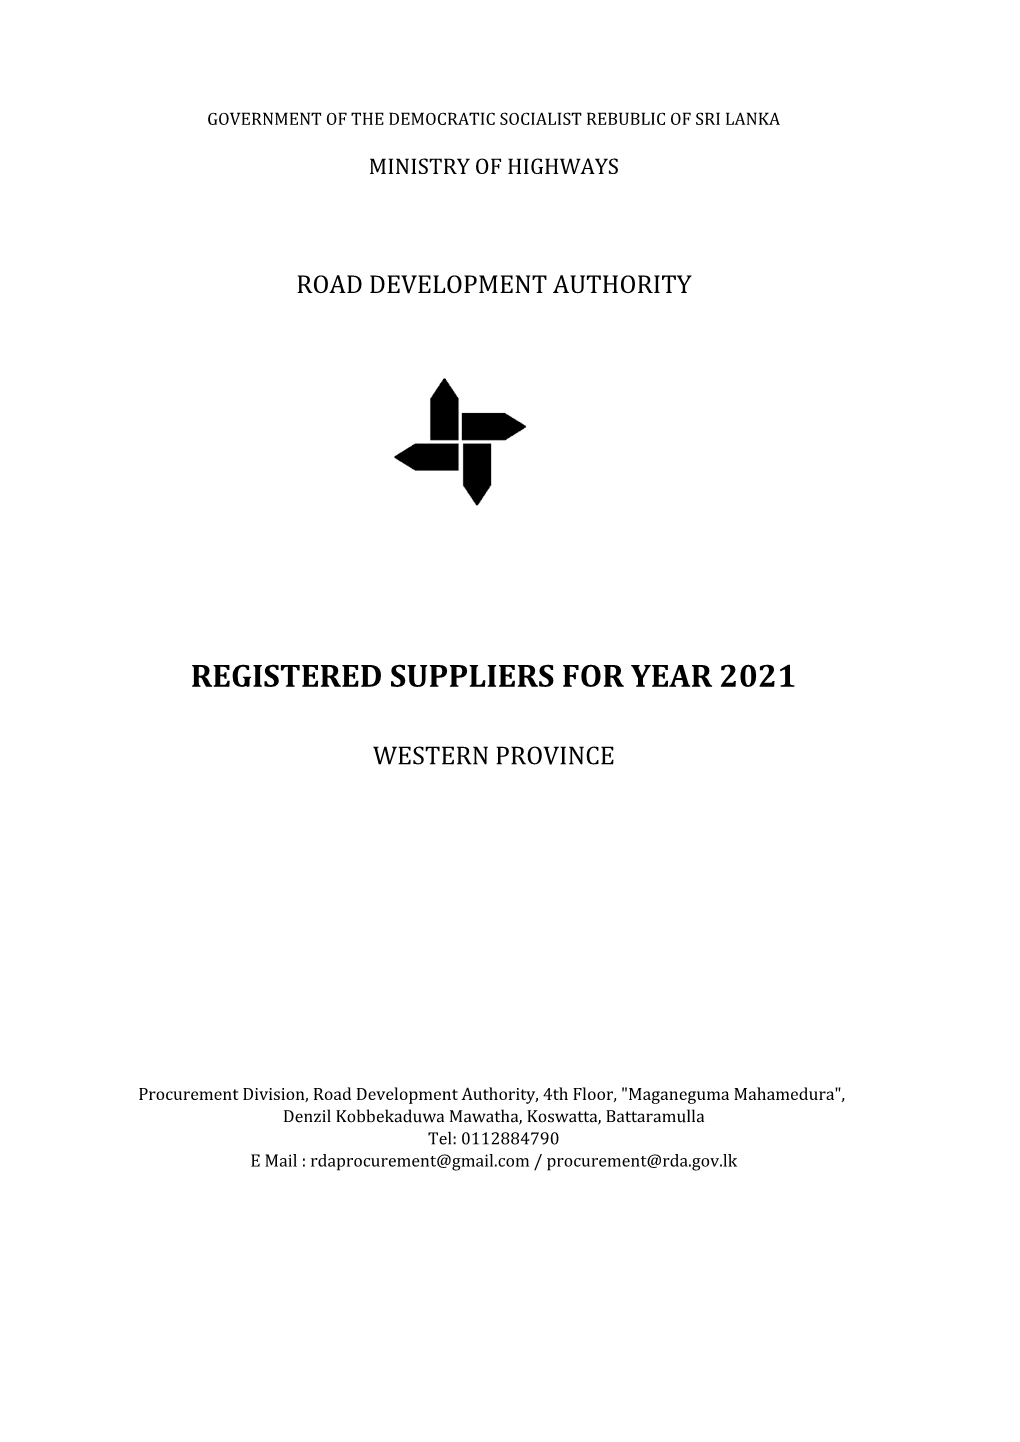 Suppliers for Year 2021